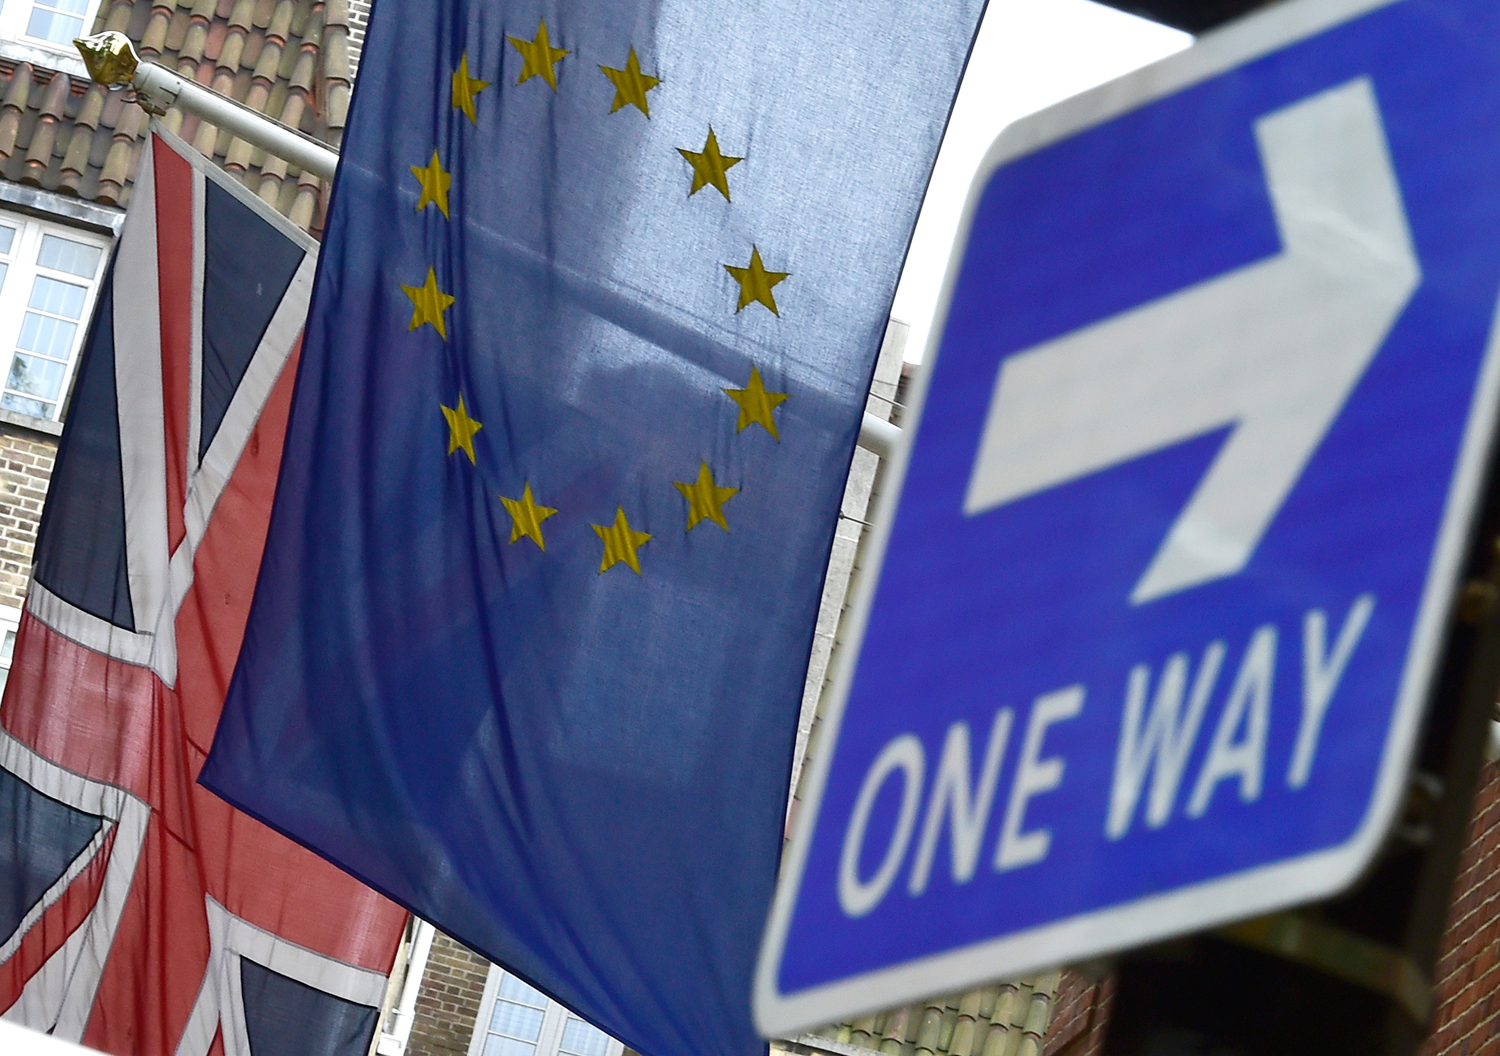 The British Union flag and European Union flag are seen hanging outside Europe House in central London on June 9, 2015. (Toby Melville —Reuters)